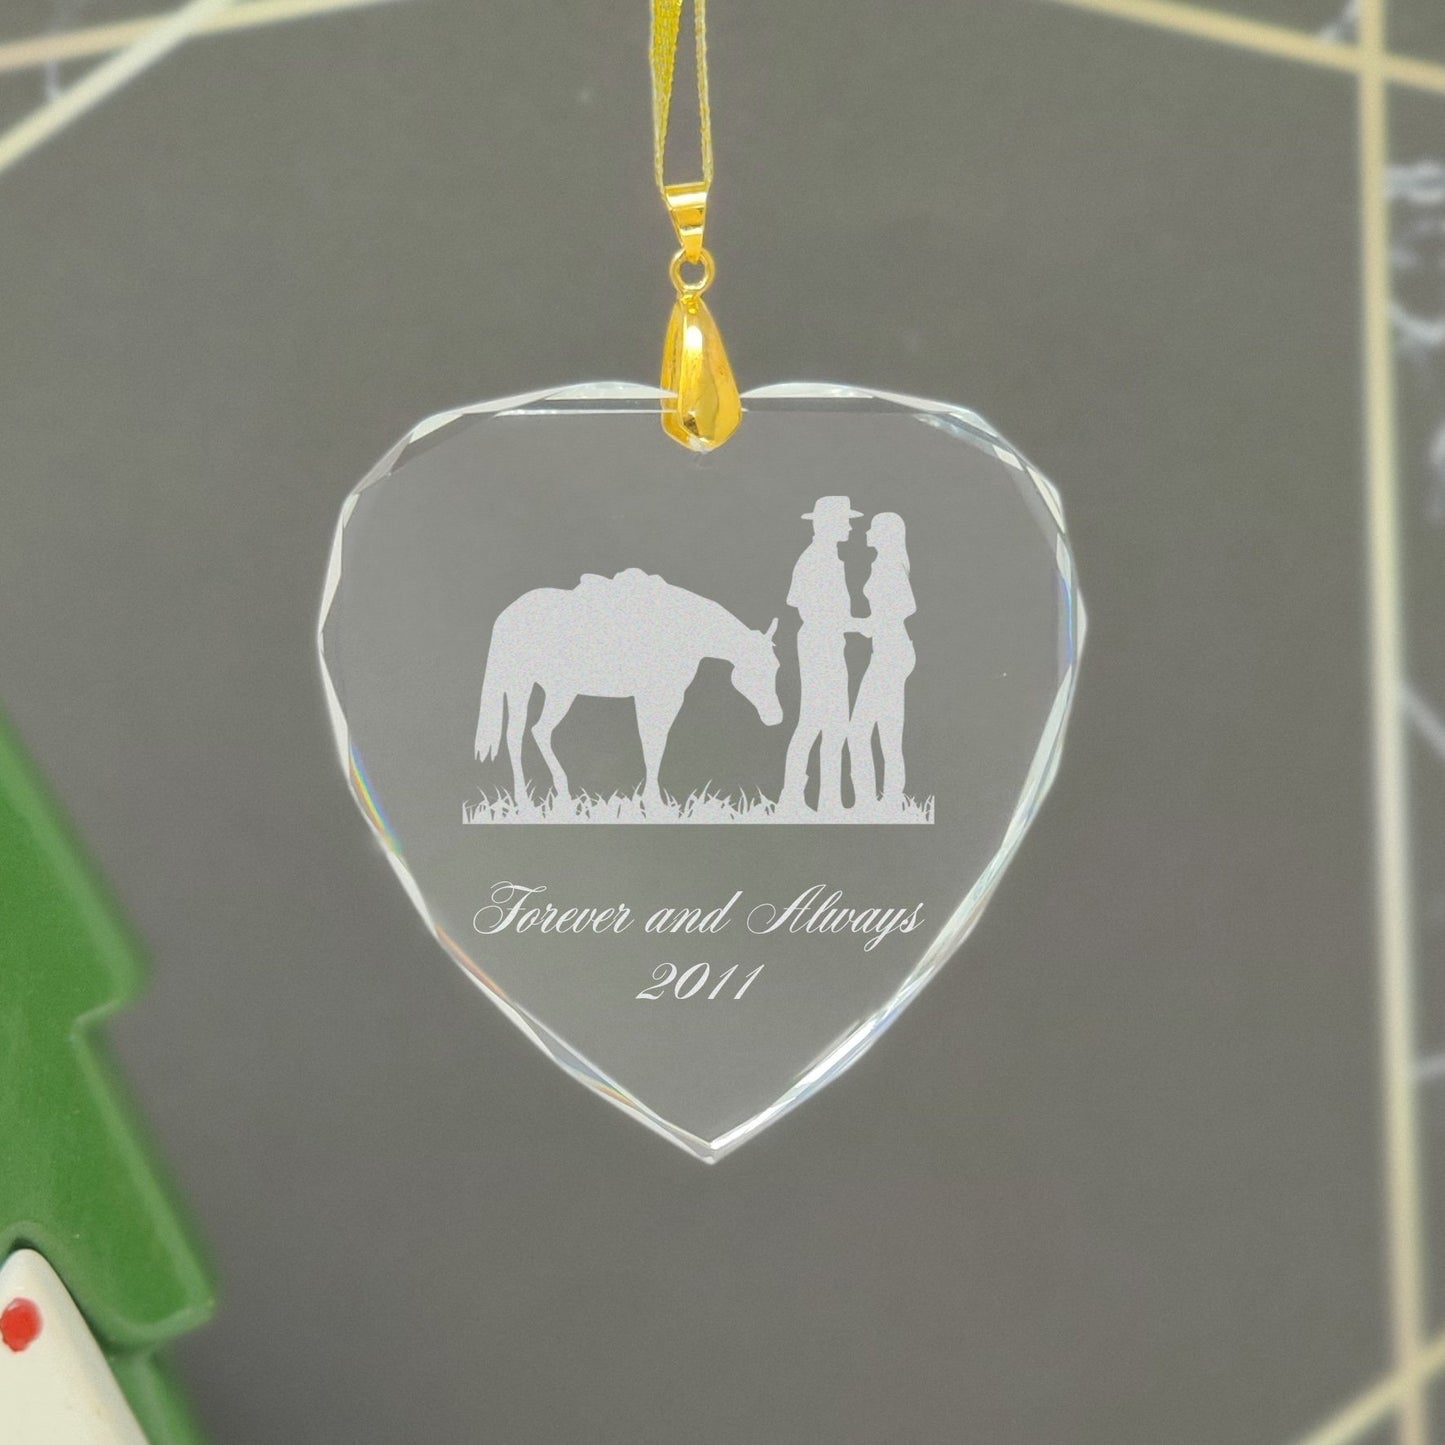 LaserGram Christmas Ornament, Hiker Woman, Personalized Engraving Included (Heart Shape)